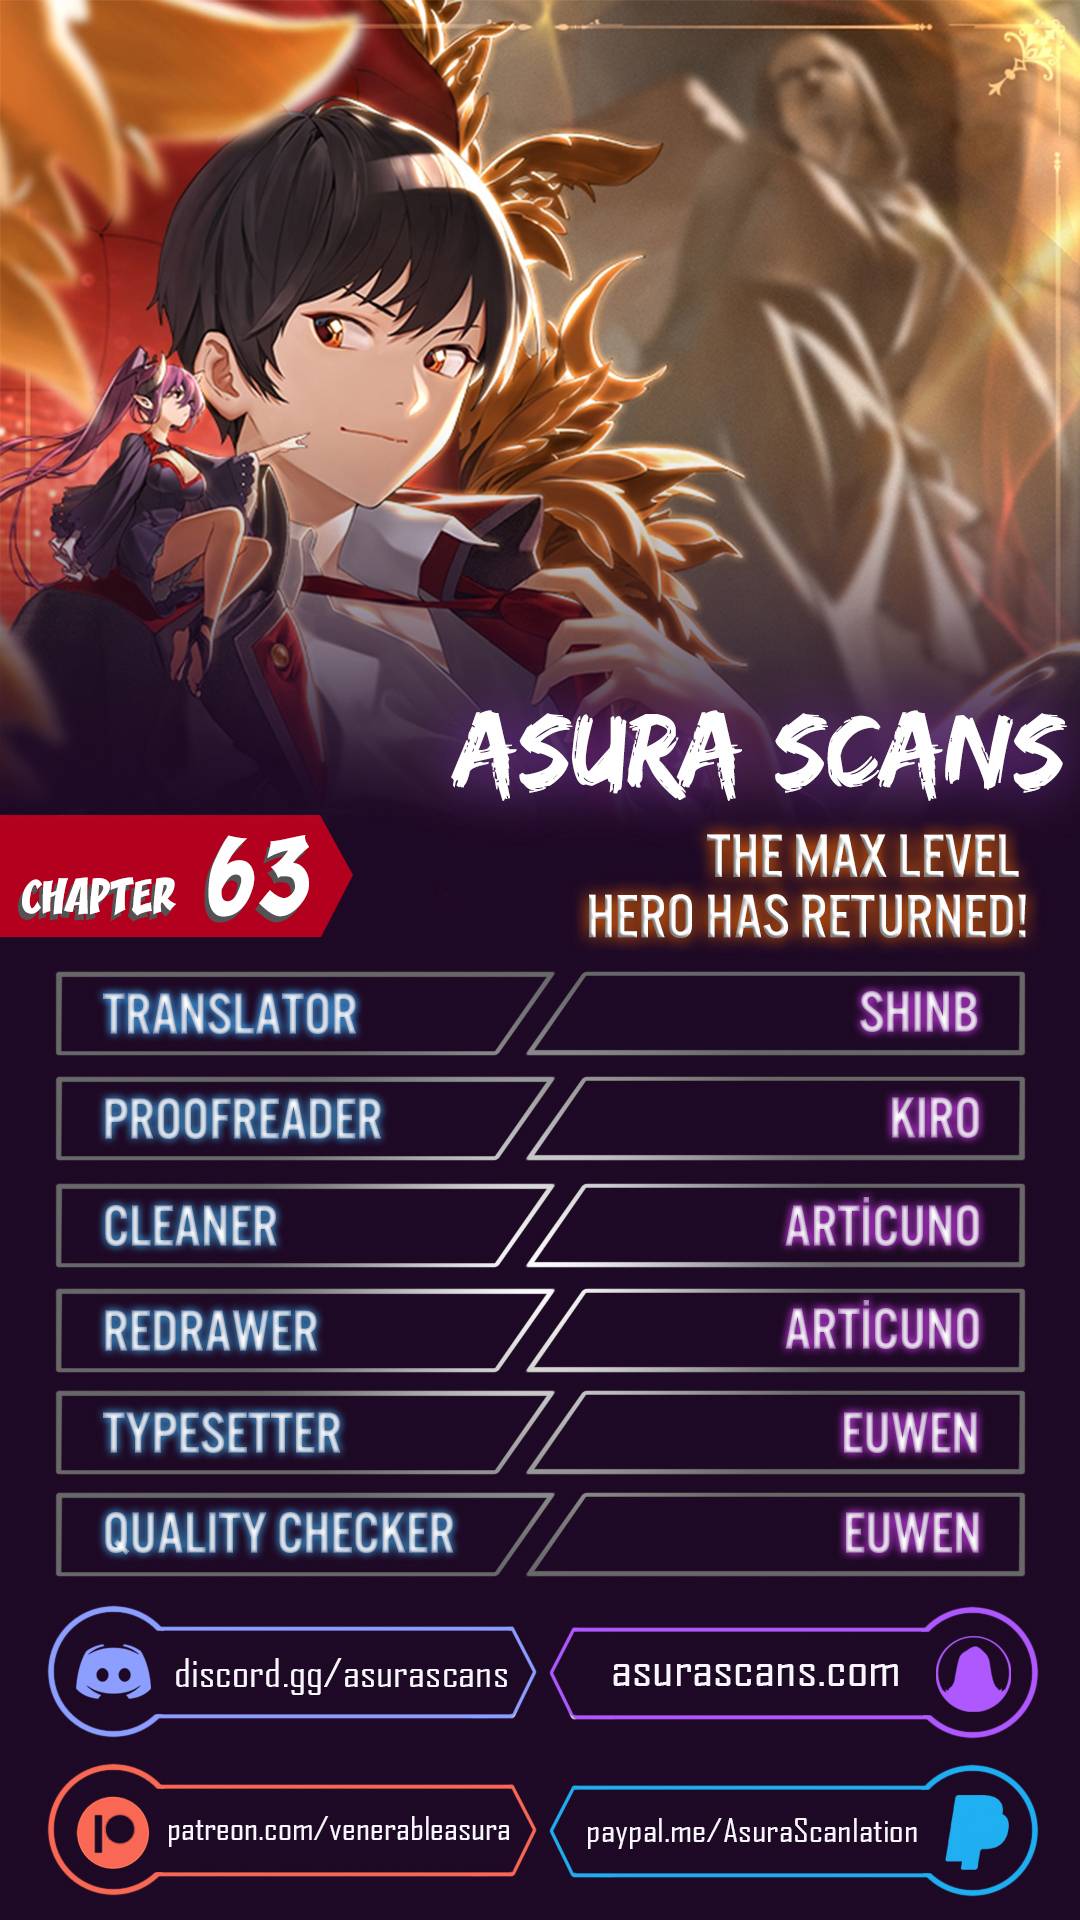 The MAX leveled hero will return! Chapter 63